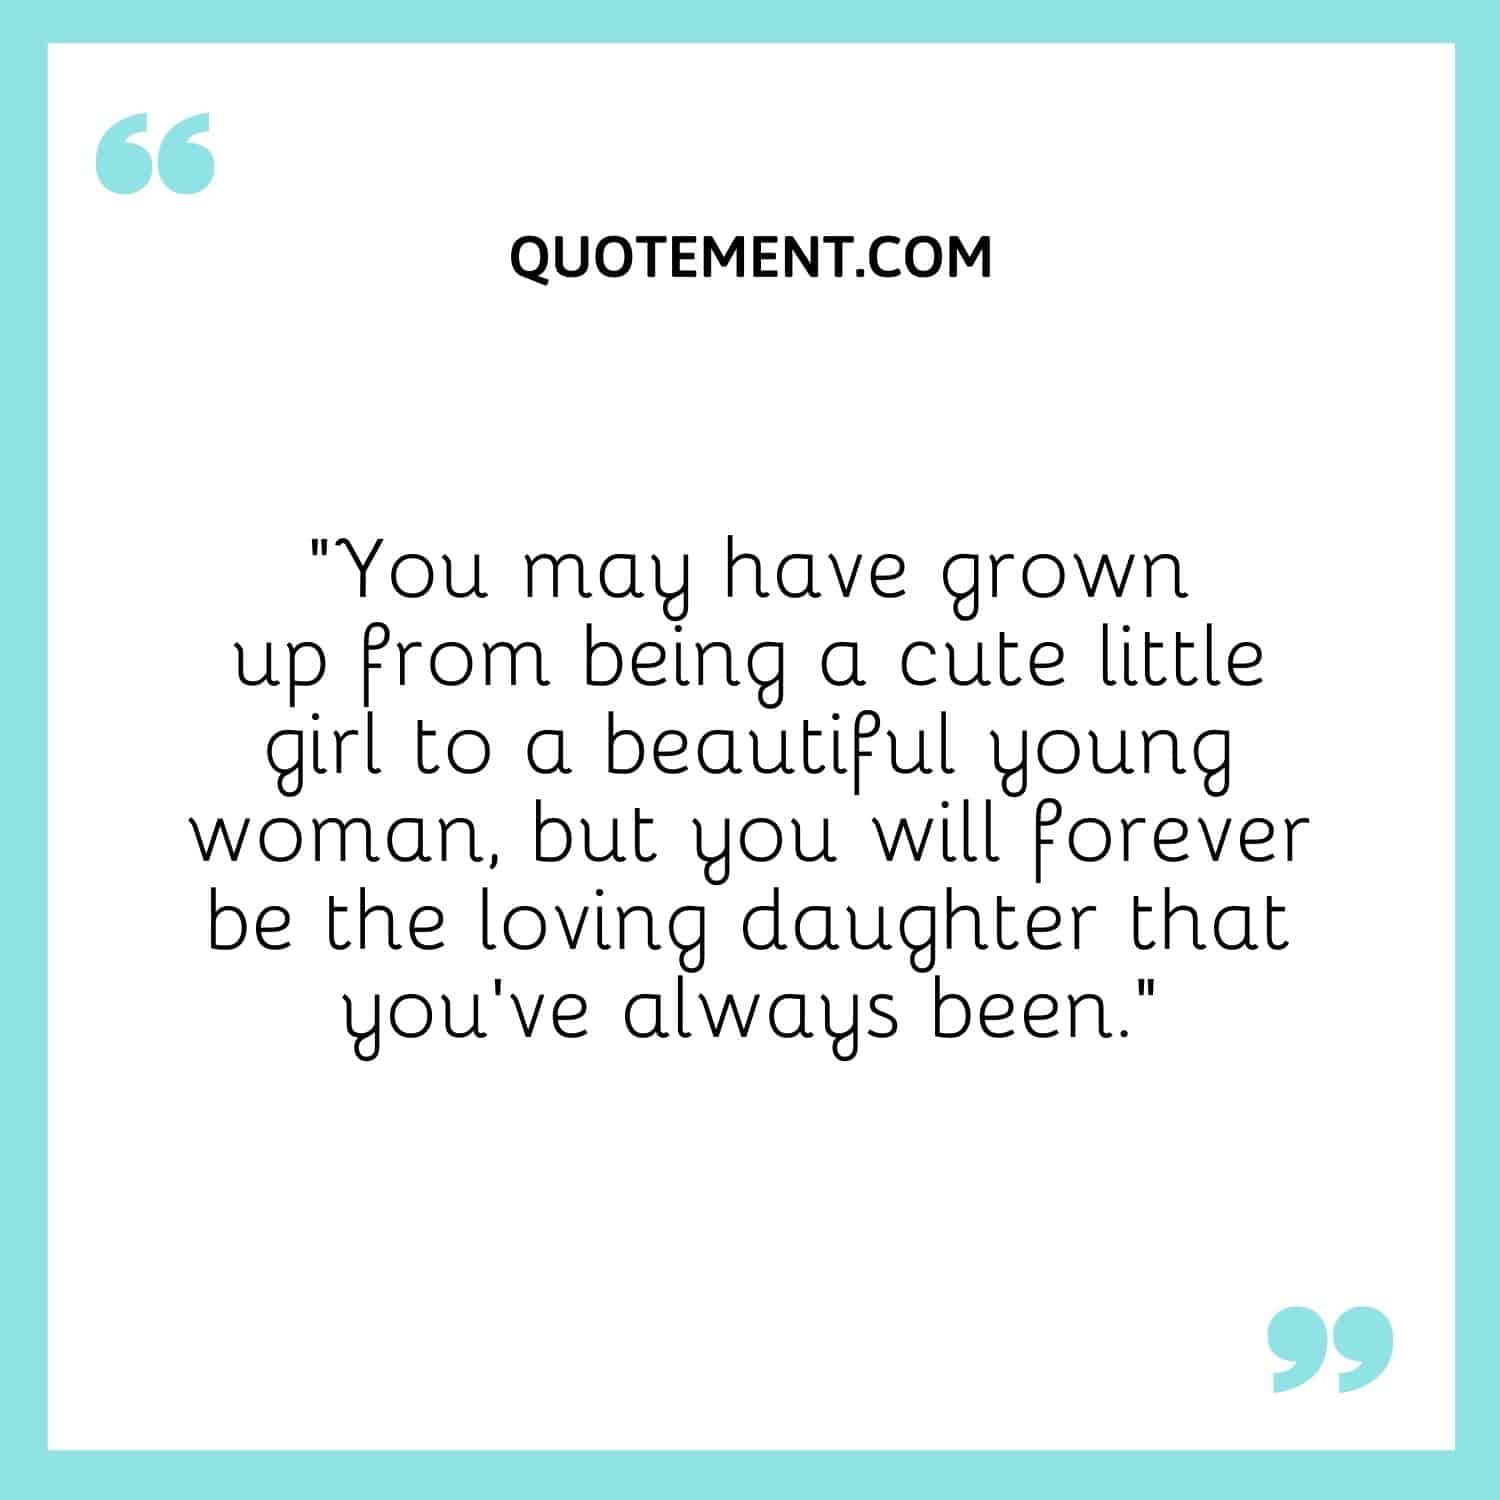 You will forever be the loving daughter that you’ve always been.